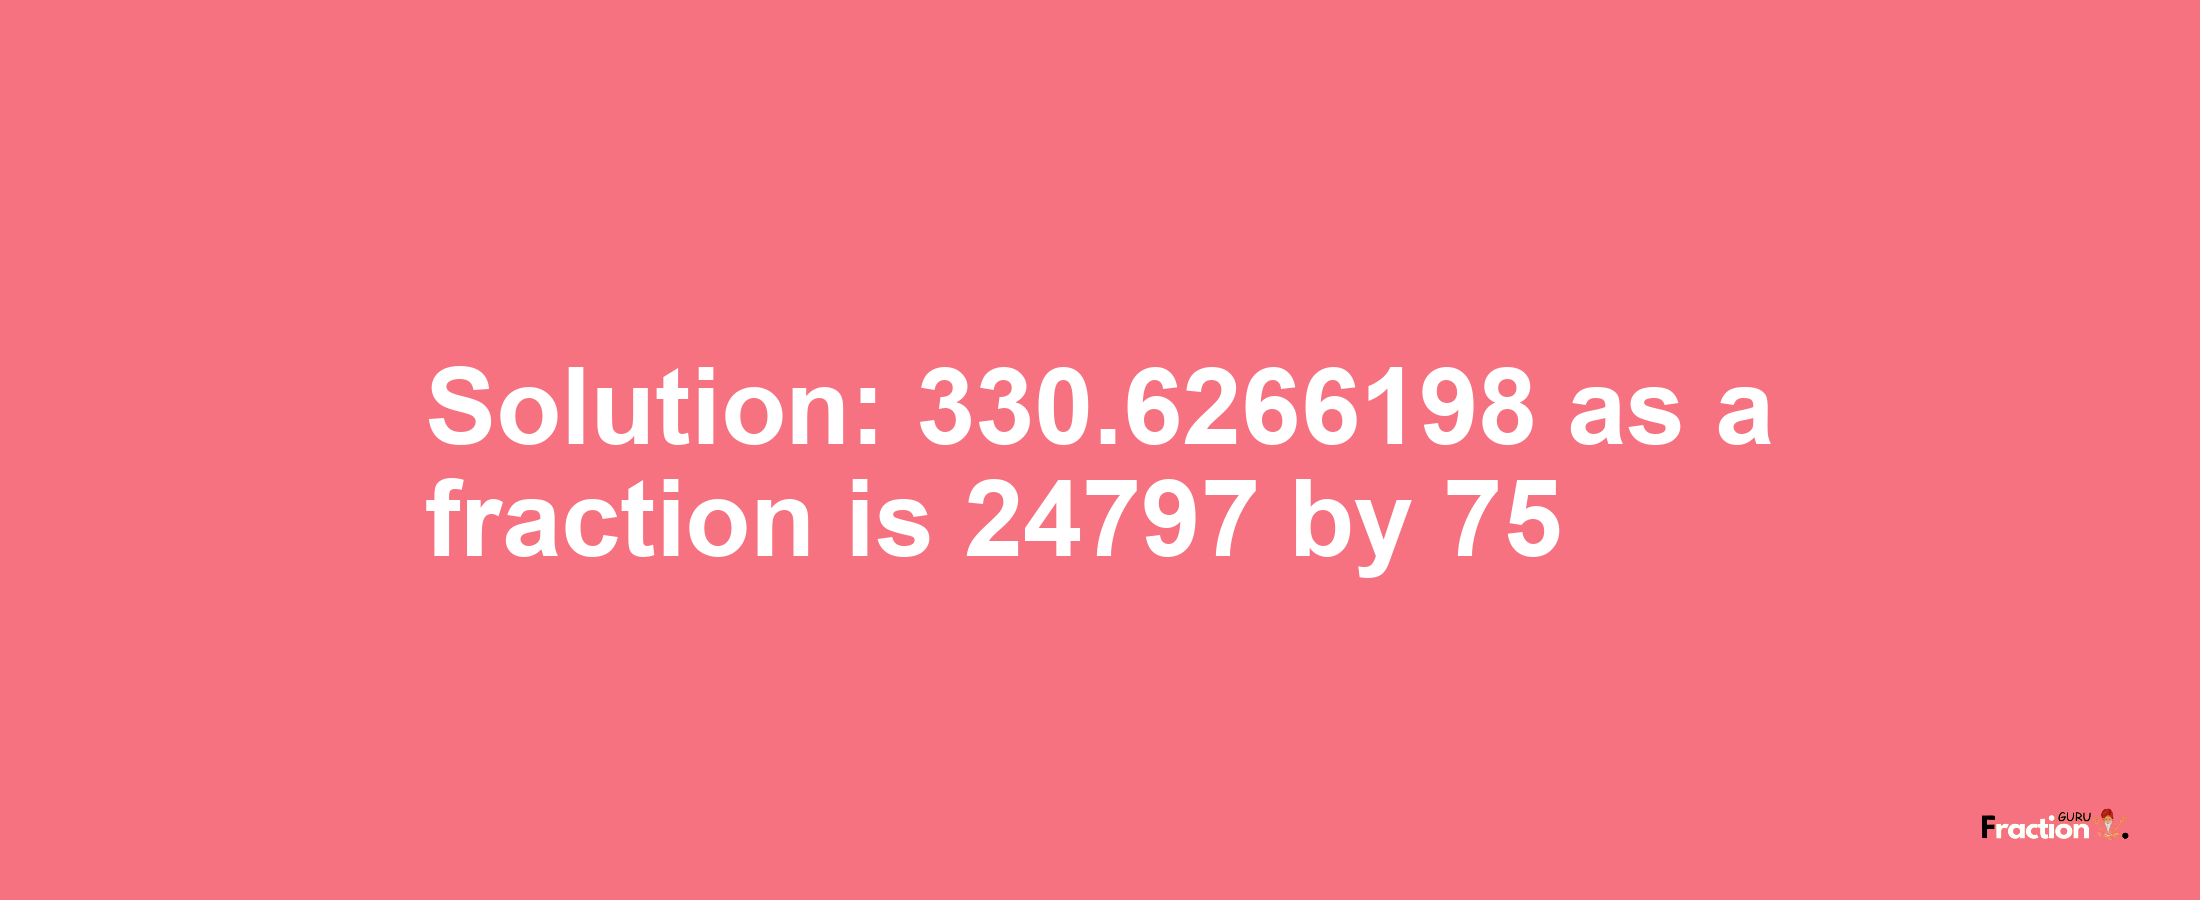 Solution:330.6266198 as a fraction is 24797/75